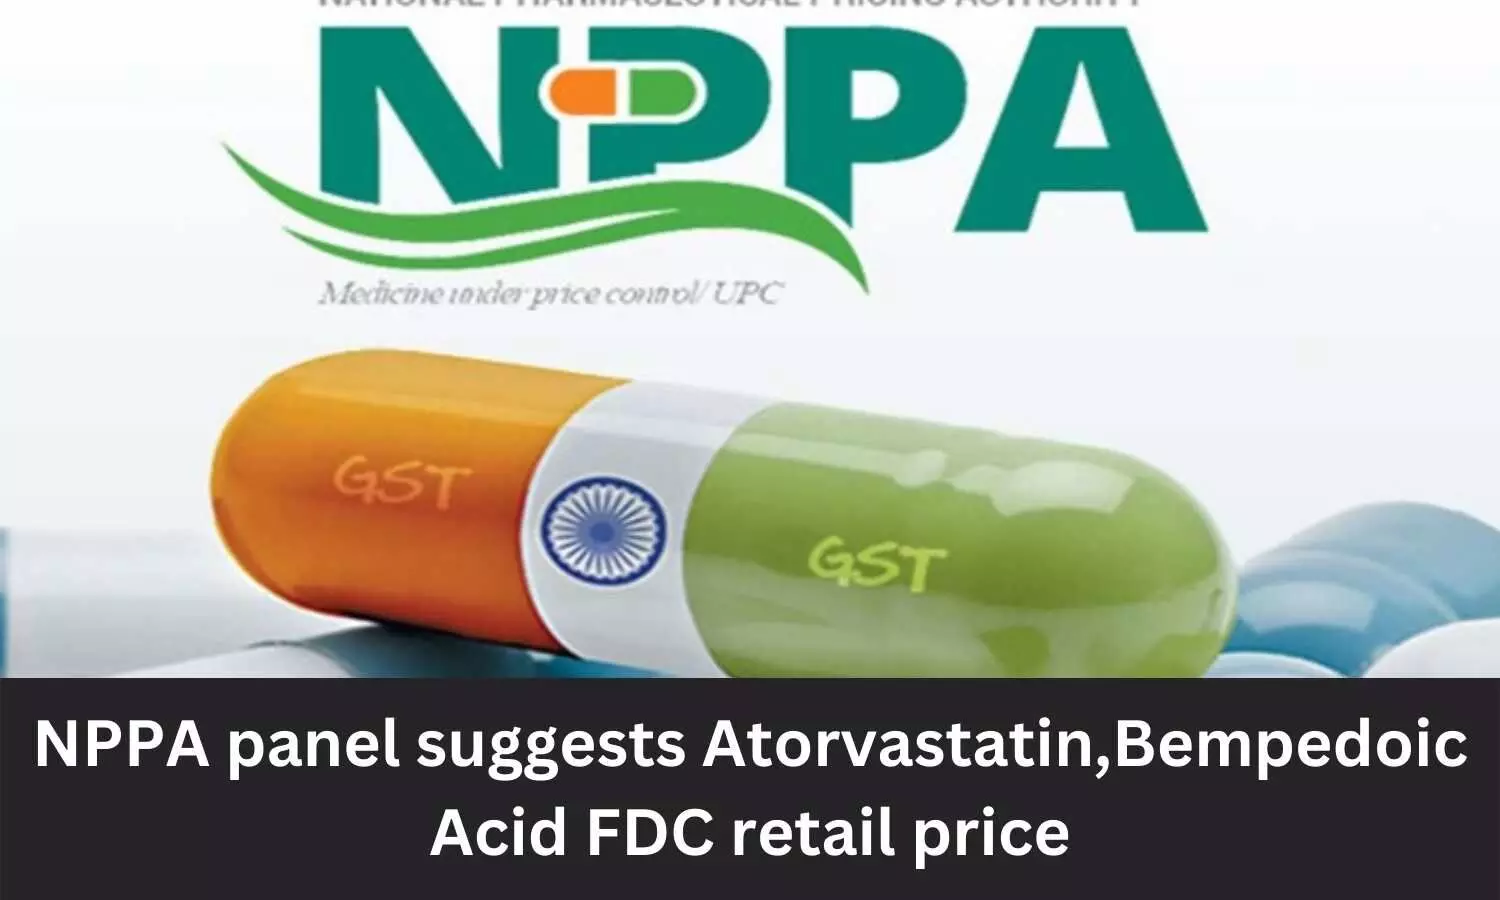 NPPA panel suggests retail price of Atorvastatin, Bempedoic acid FDC marketed by Zydus Healthcare